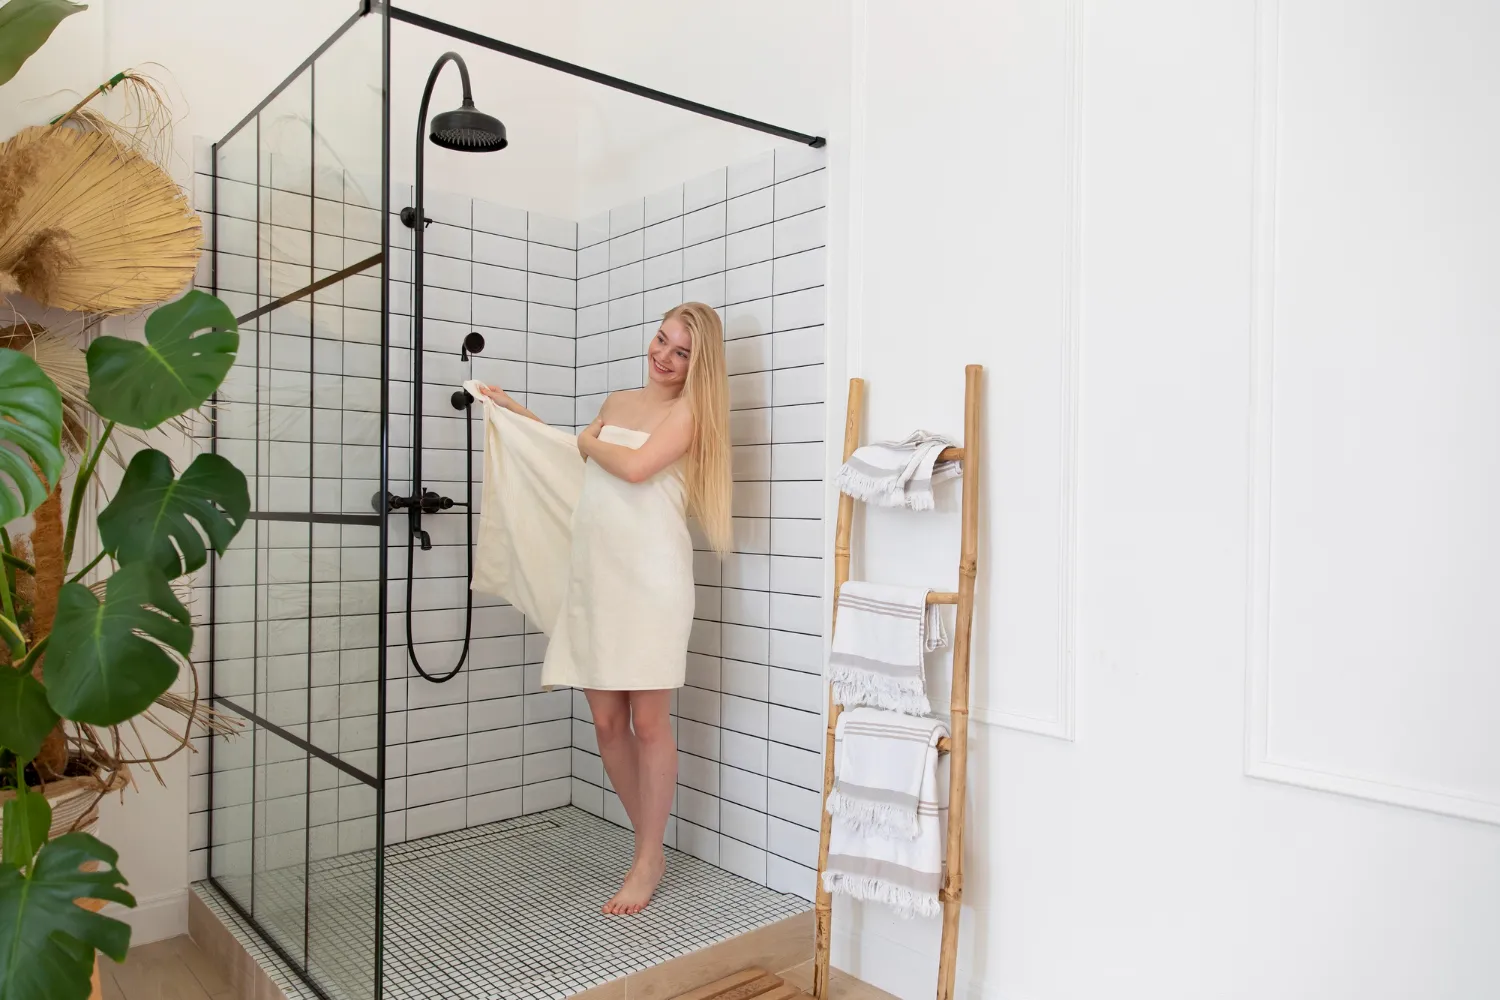 A walk-in shower is a great water-saving option than bathtub